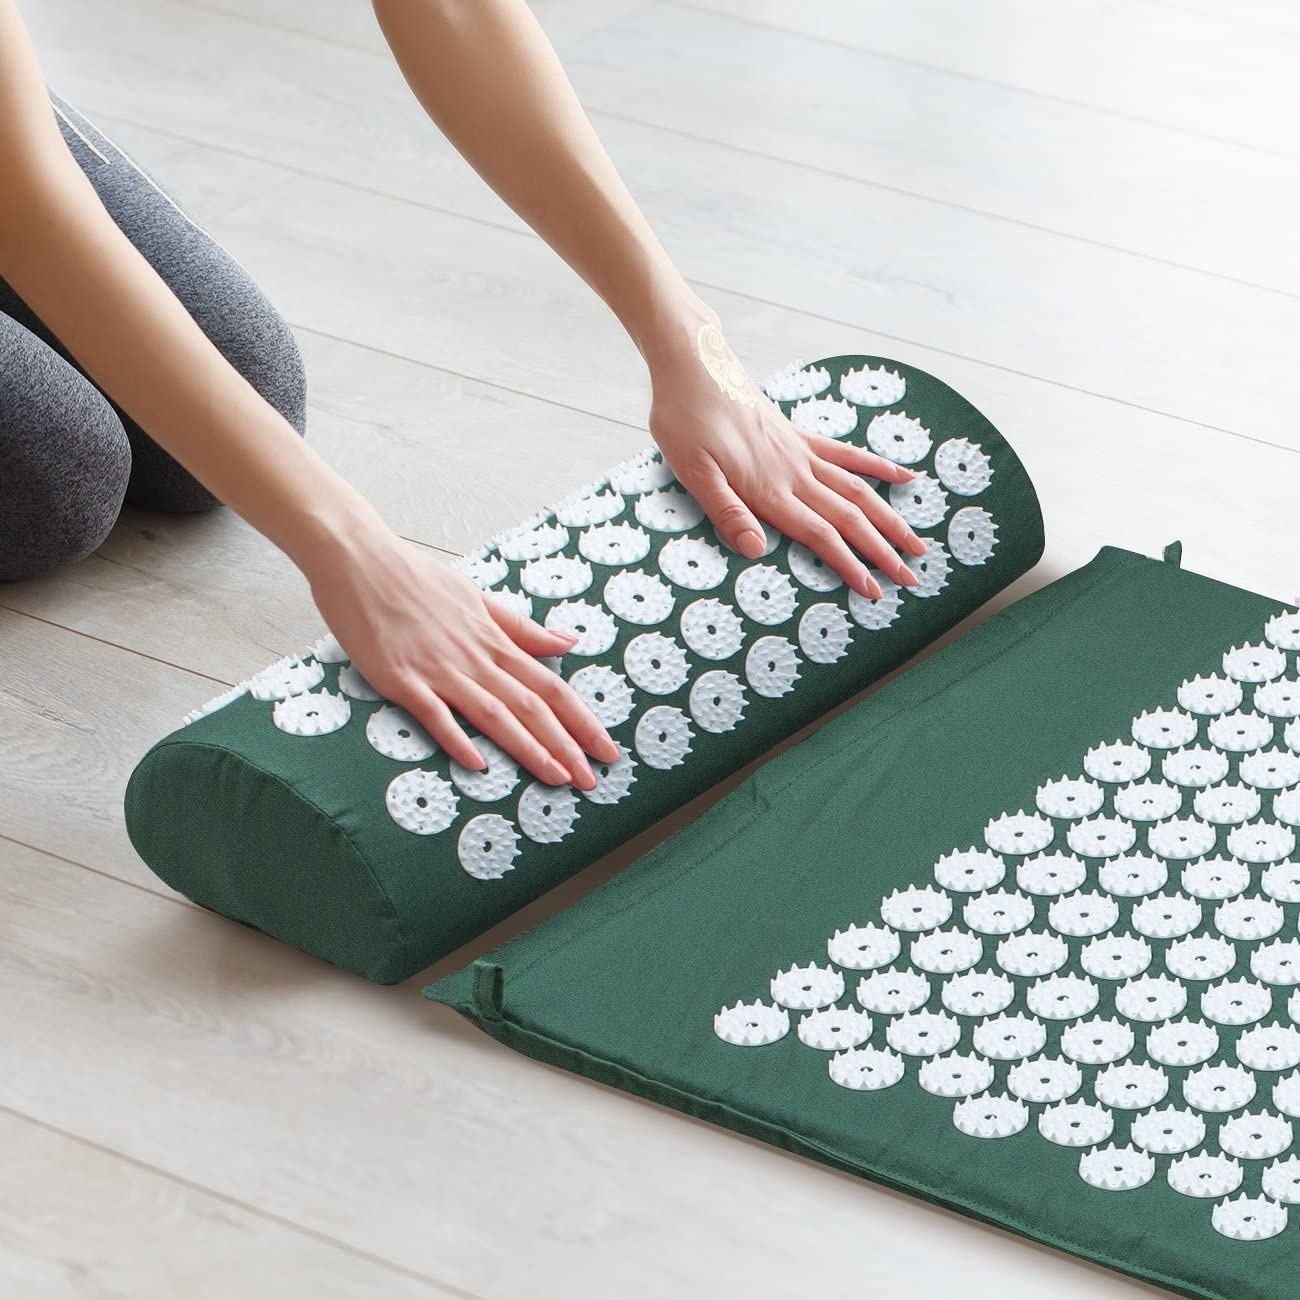 a person adjusting the acupressure pillow and mat